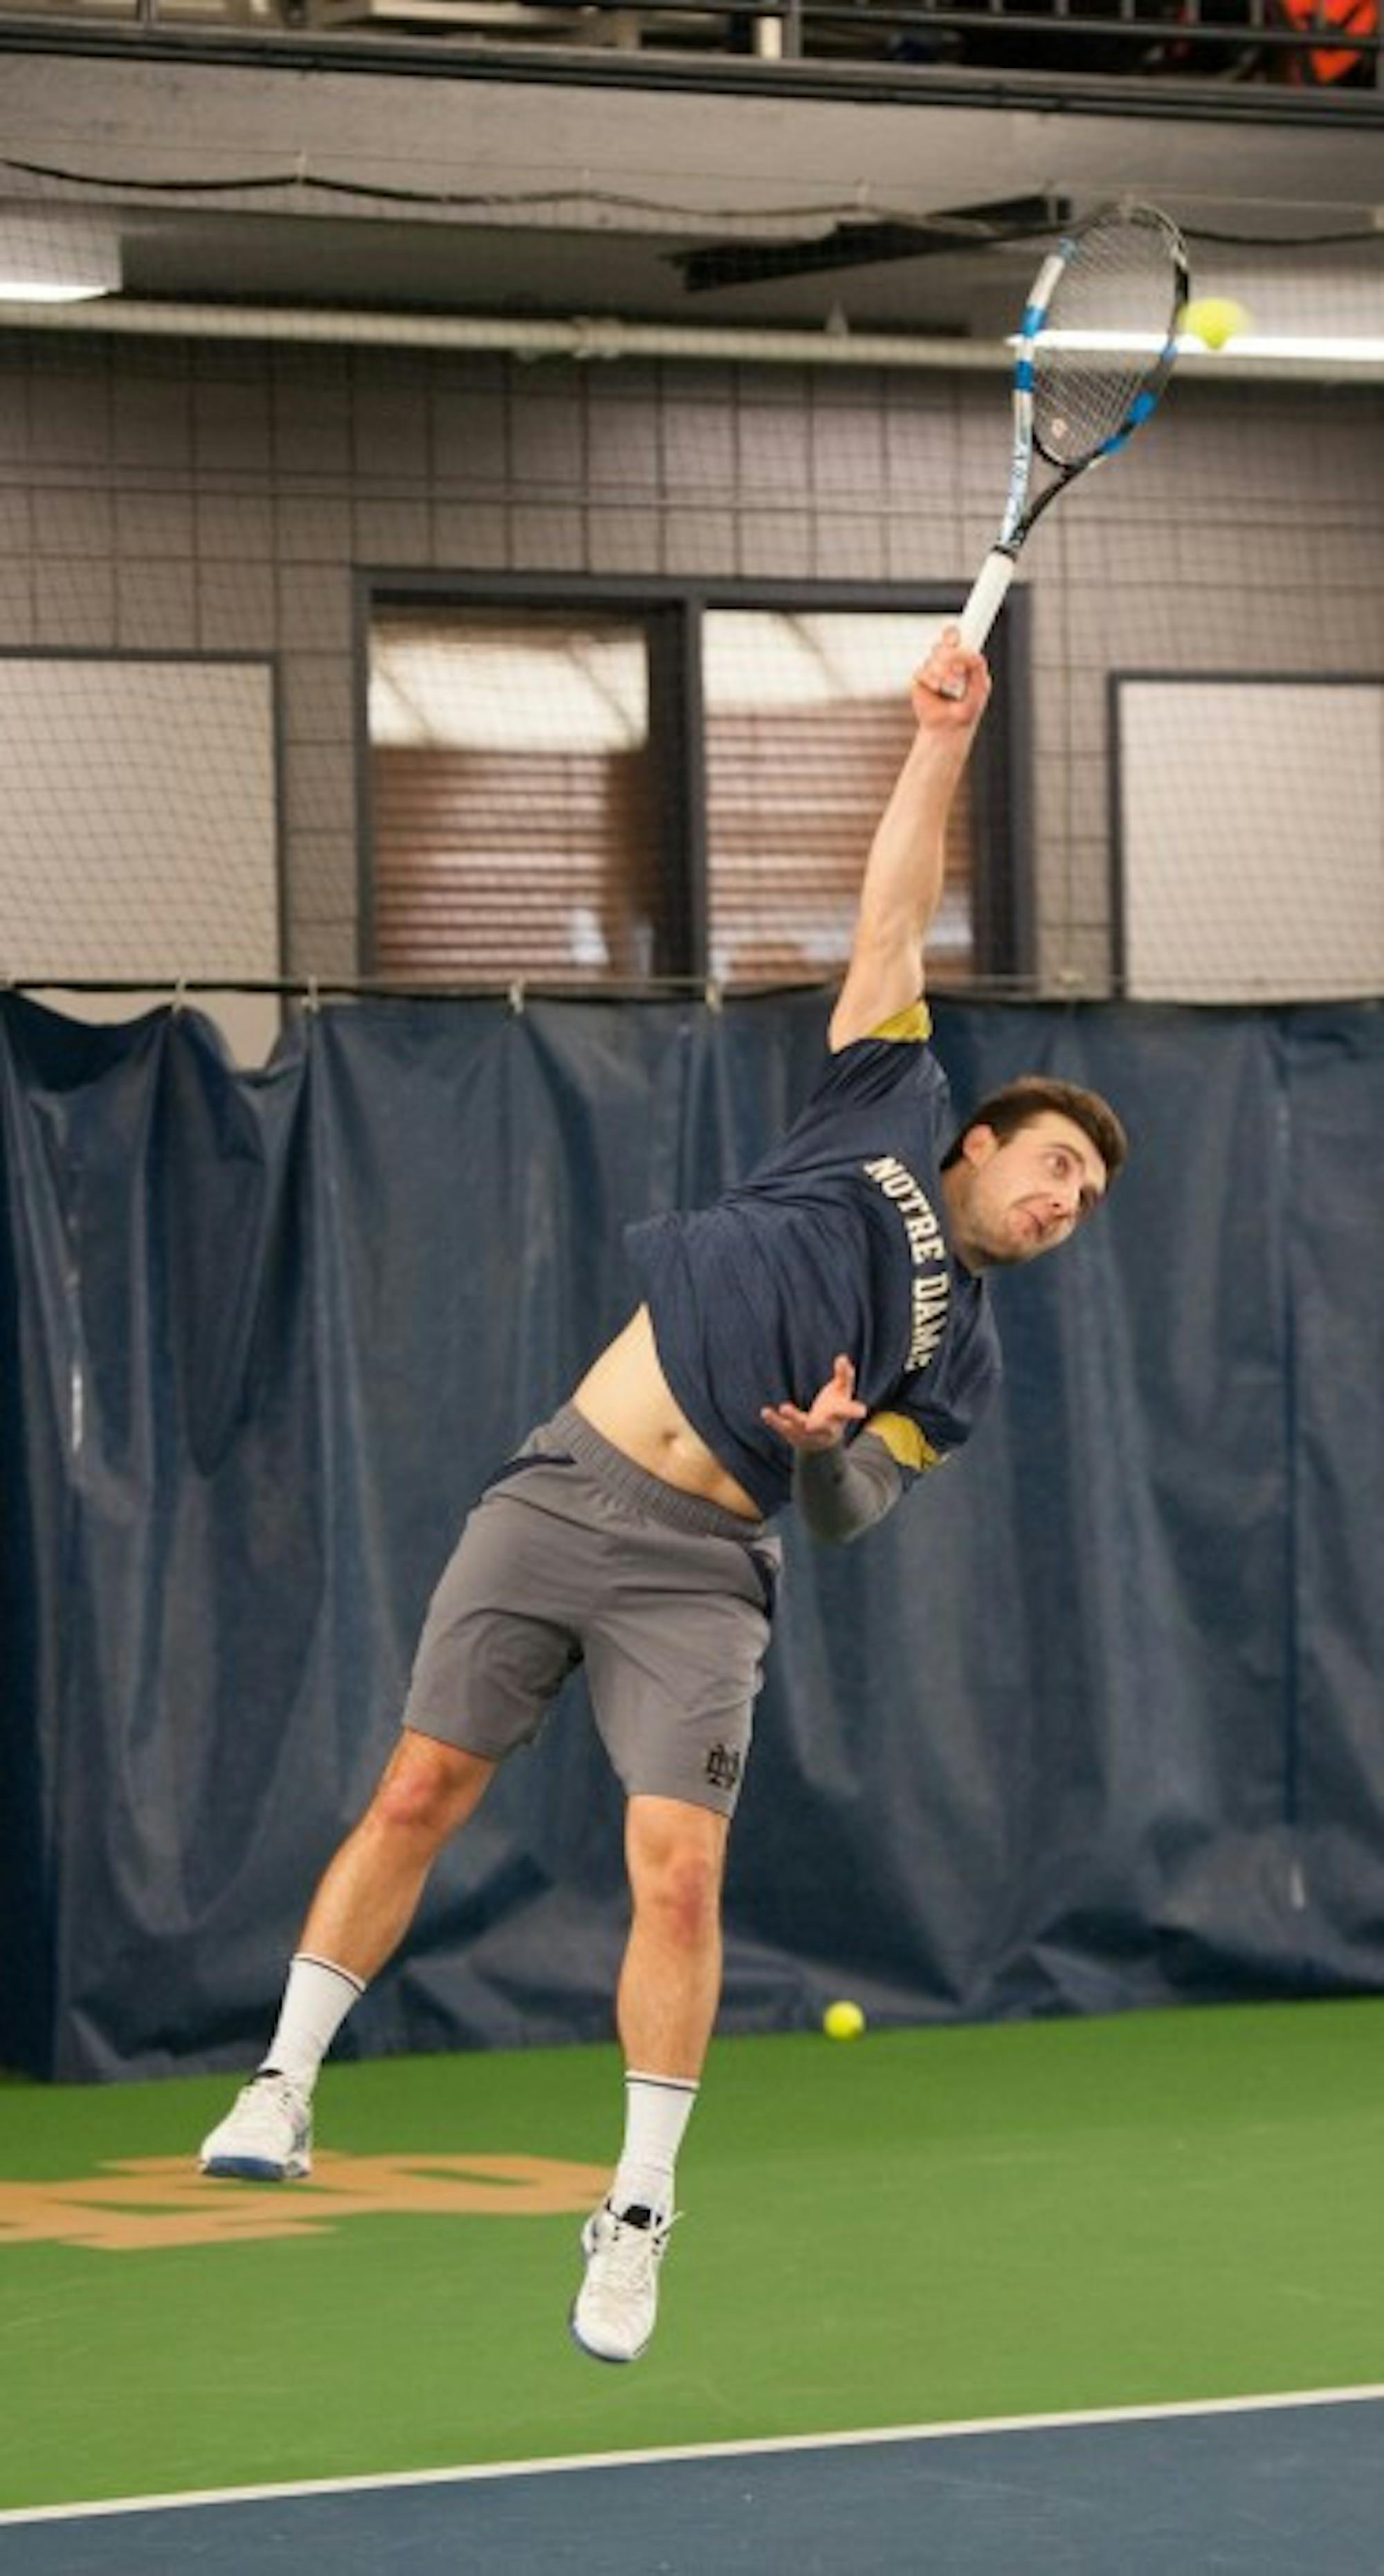 Irish senior Eddy Covalschi serves the ball during Notre Dame's 7-0 win over Boston College on Feb. 11 at Eck Tennis Pavilion.